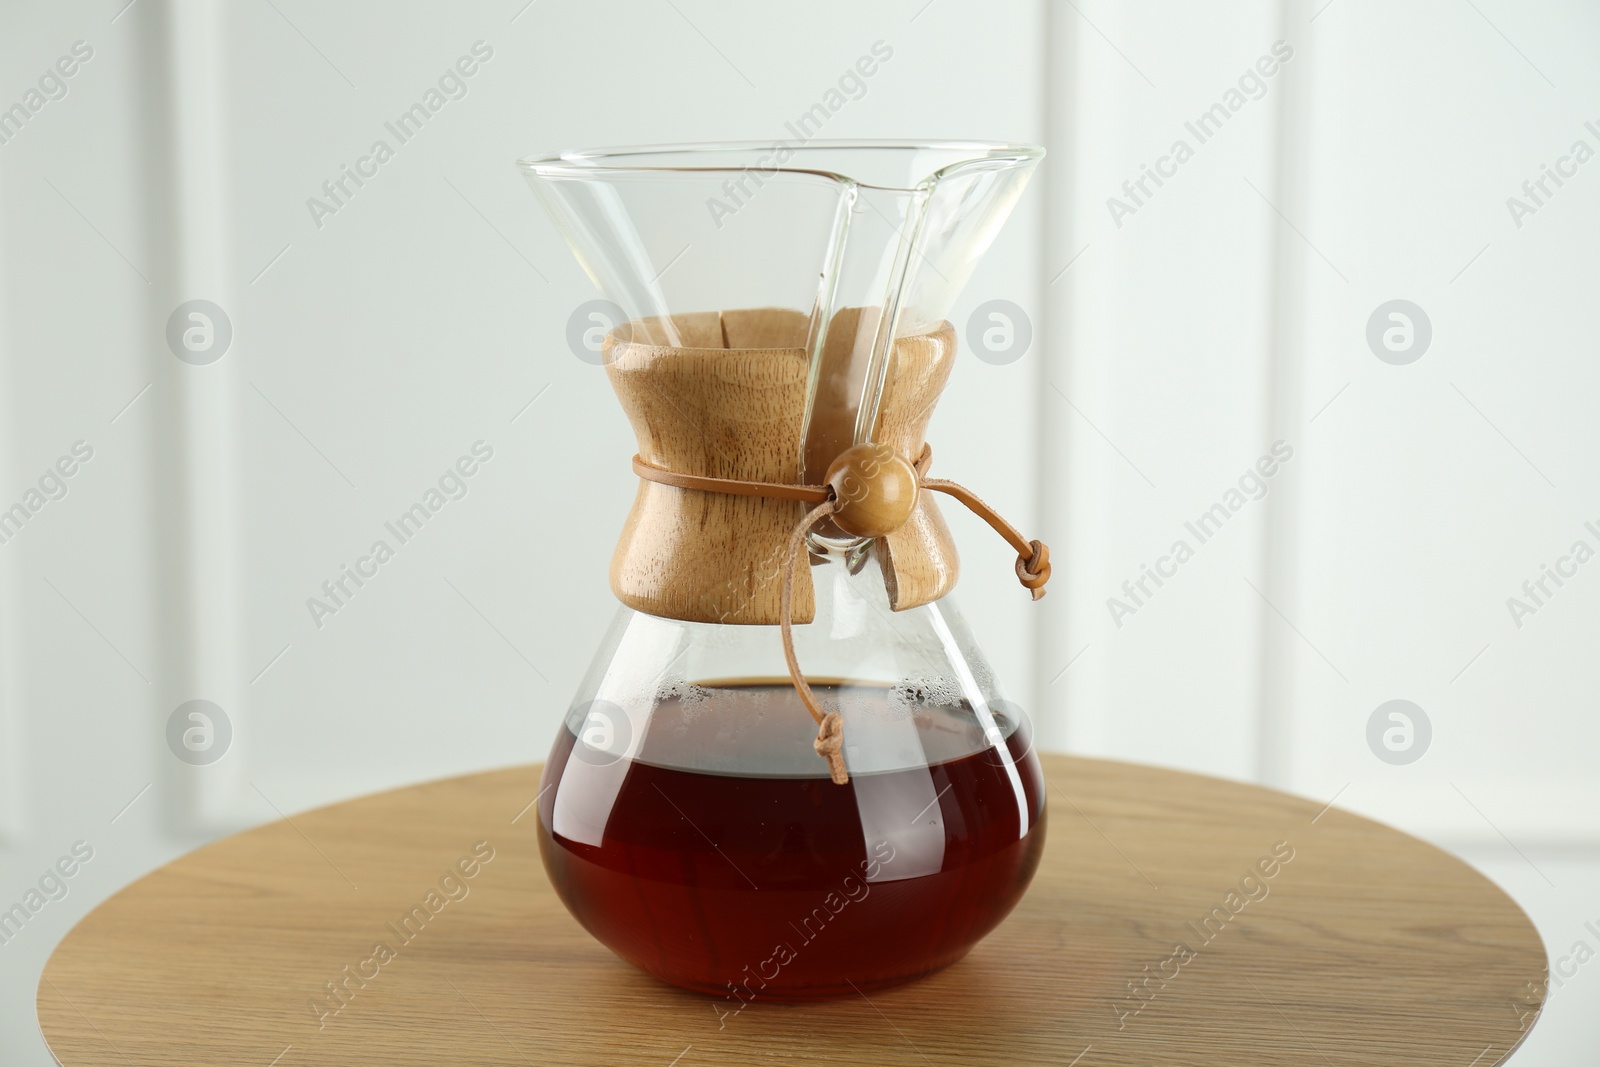 Photo of Glass chemex coffeemaker with coffee on wooden table against white wall